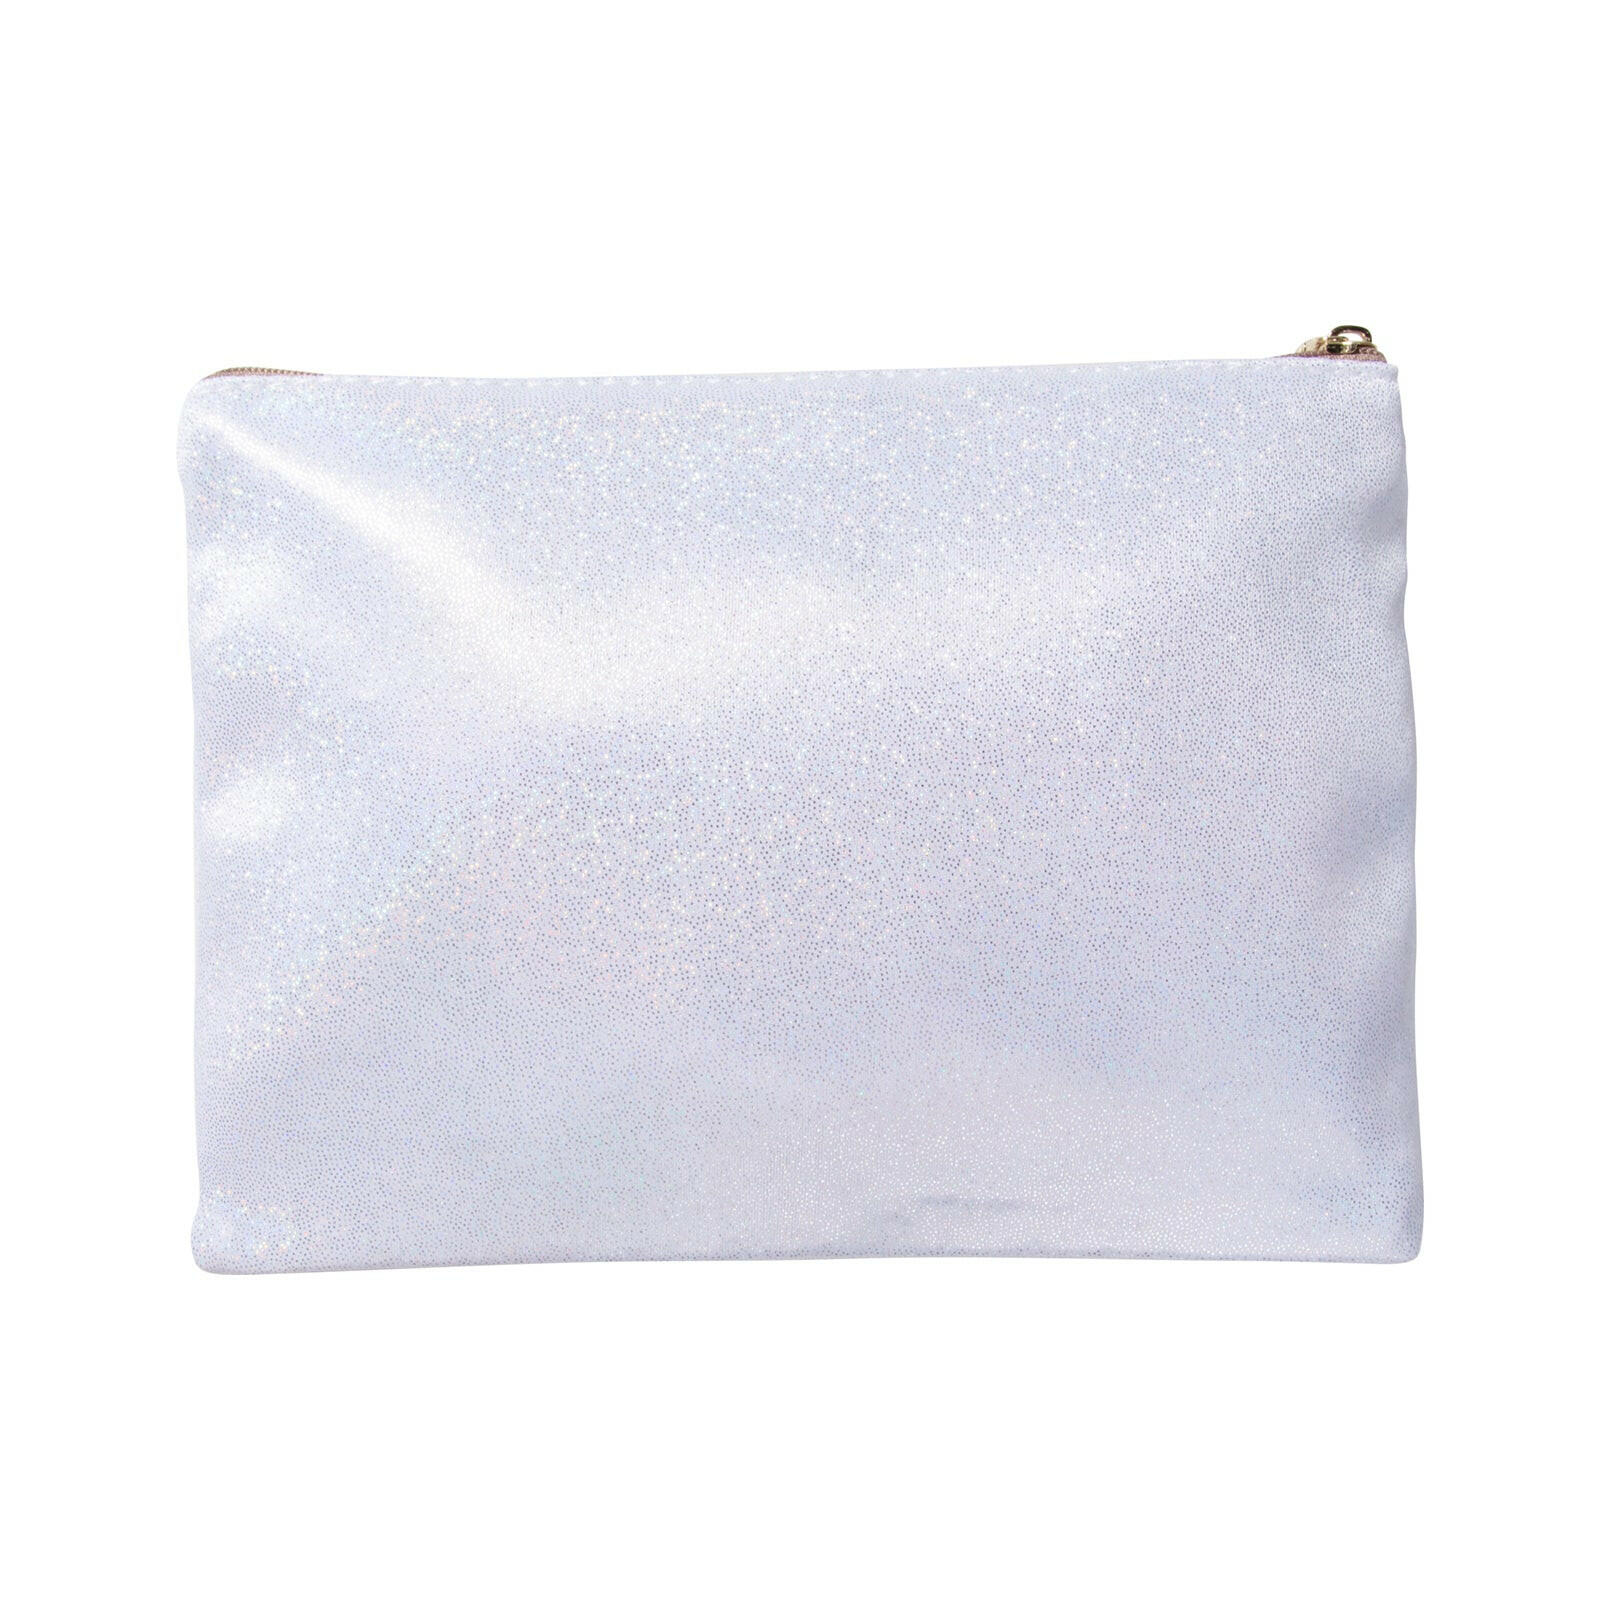 Shimmer Cosmetic Bags - 4 Pack.